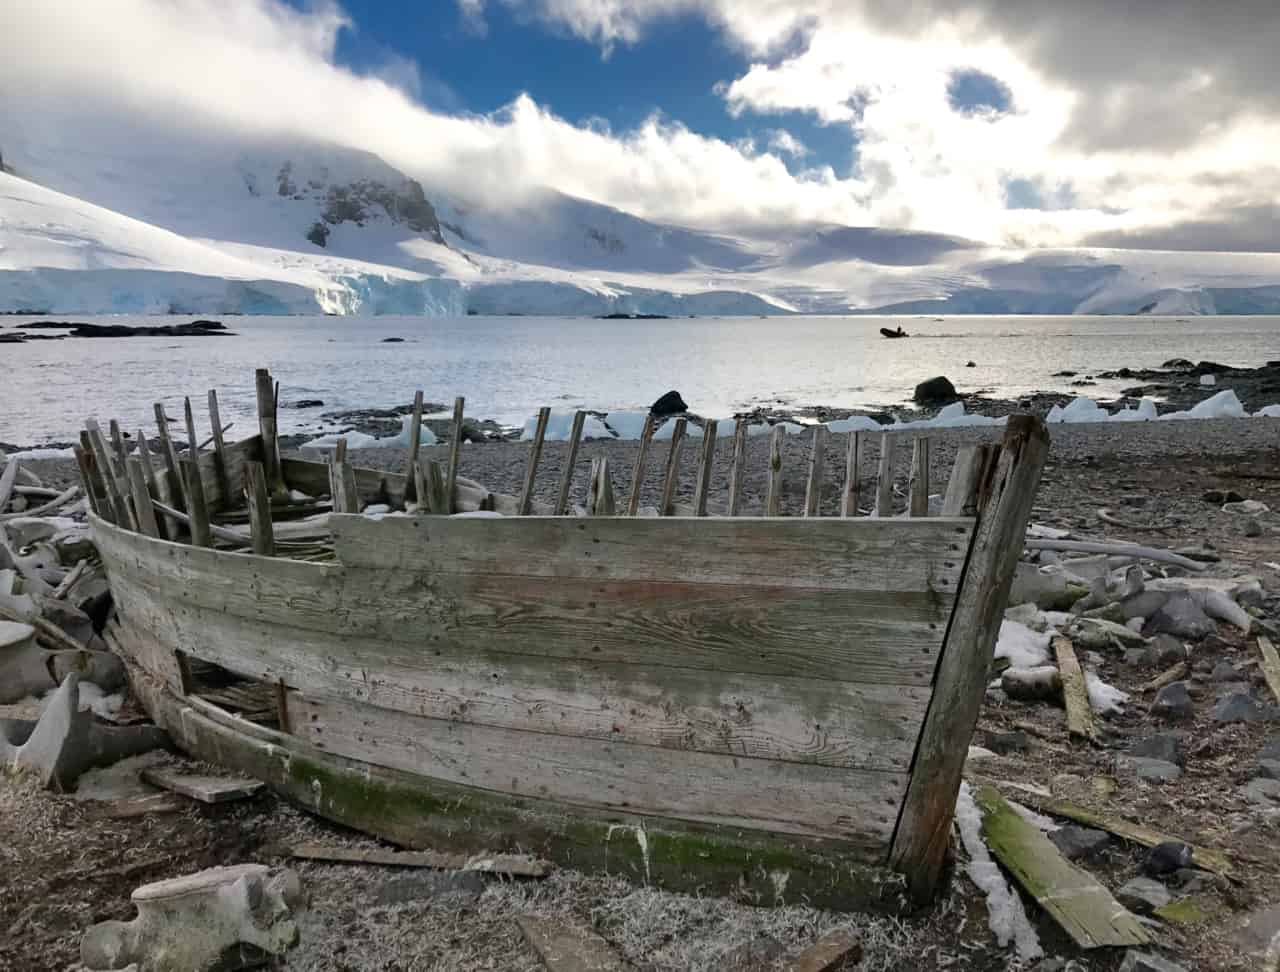 An old whaling boat sits abandoned on the shore at Mikkelson Harbour, surrounded by whale bones.